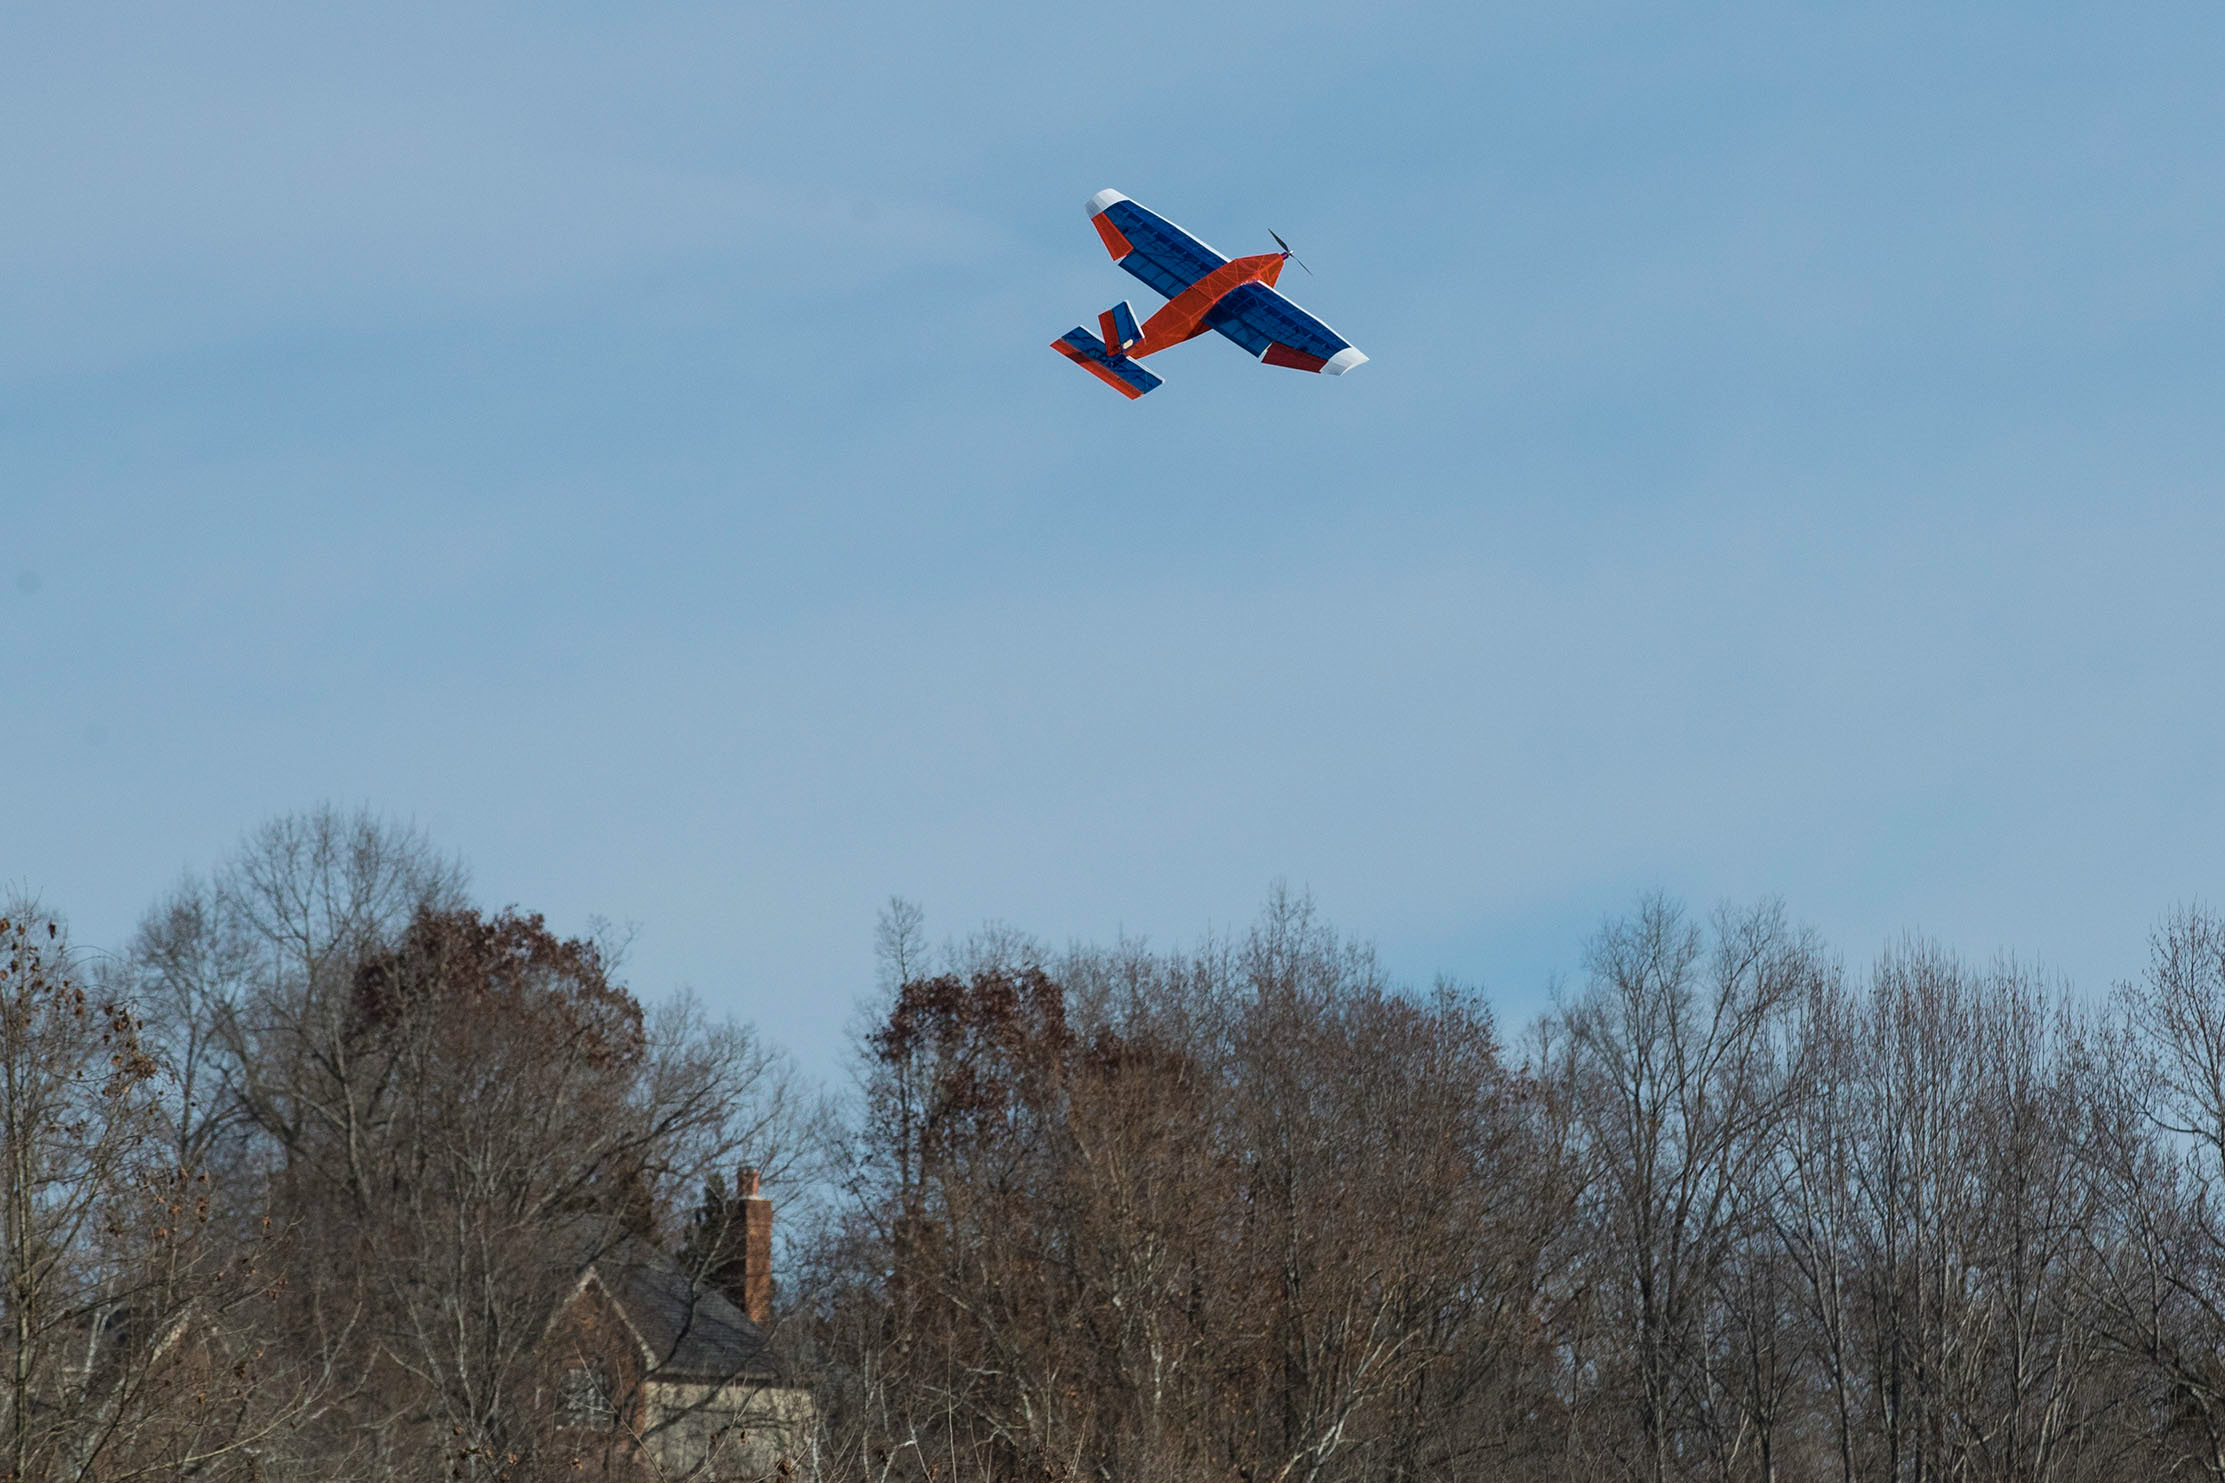 Orange, blue, and white plane flying in the air